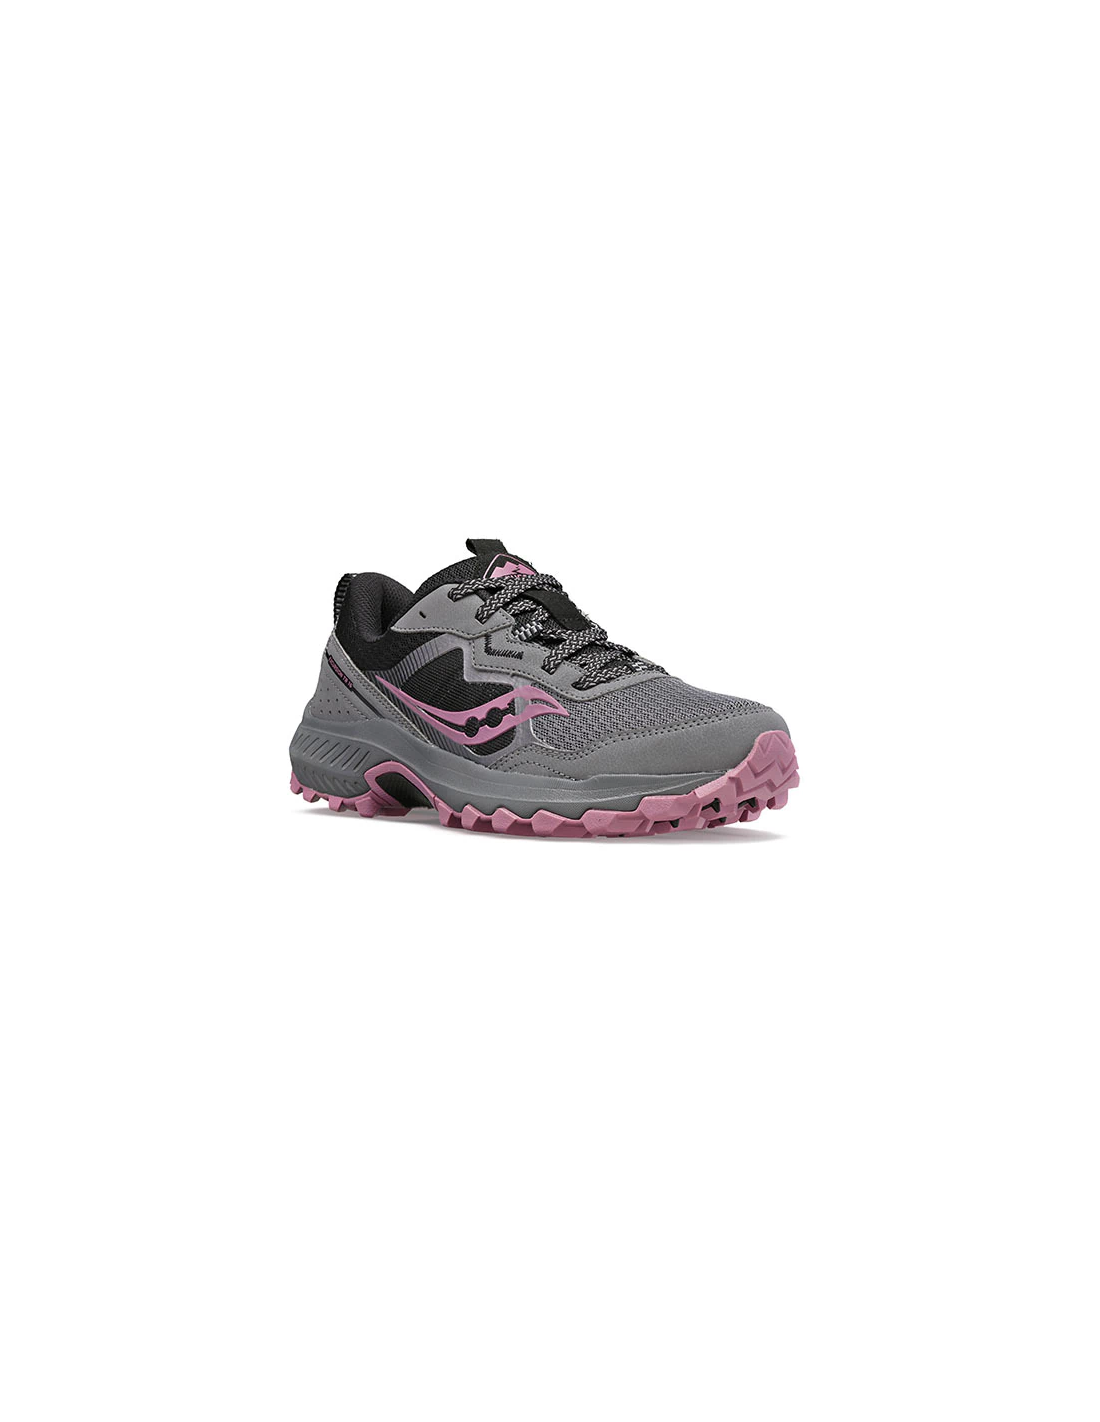 Zapatilla Saucony Excursion Tr16 Mujer Trail Charcoal/rose S10744-20